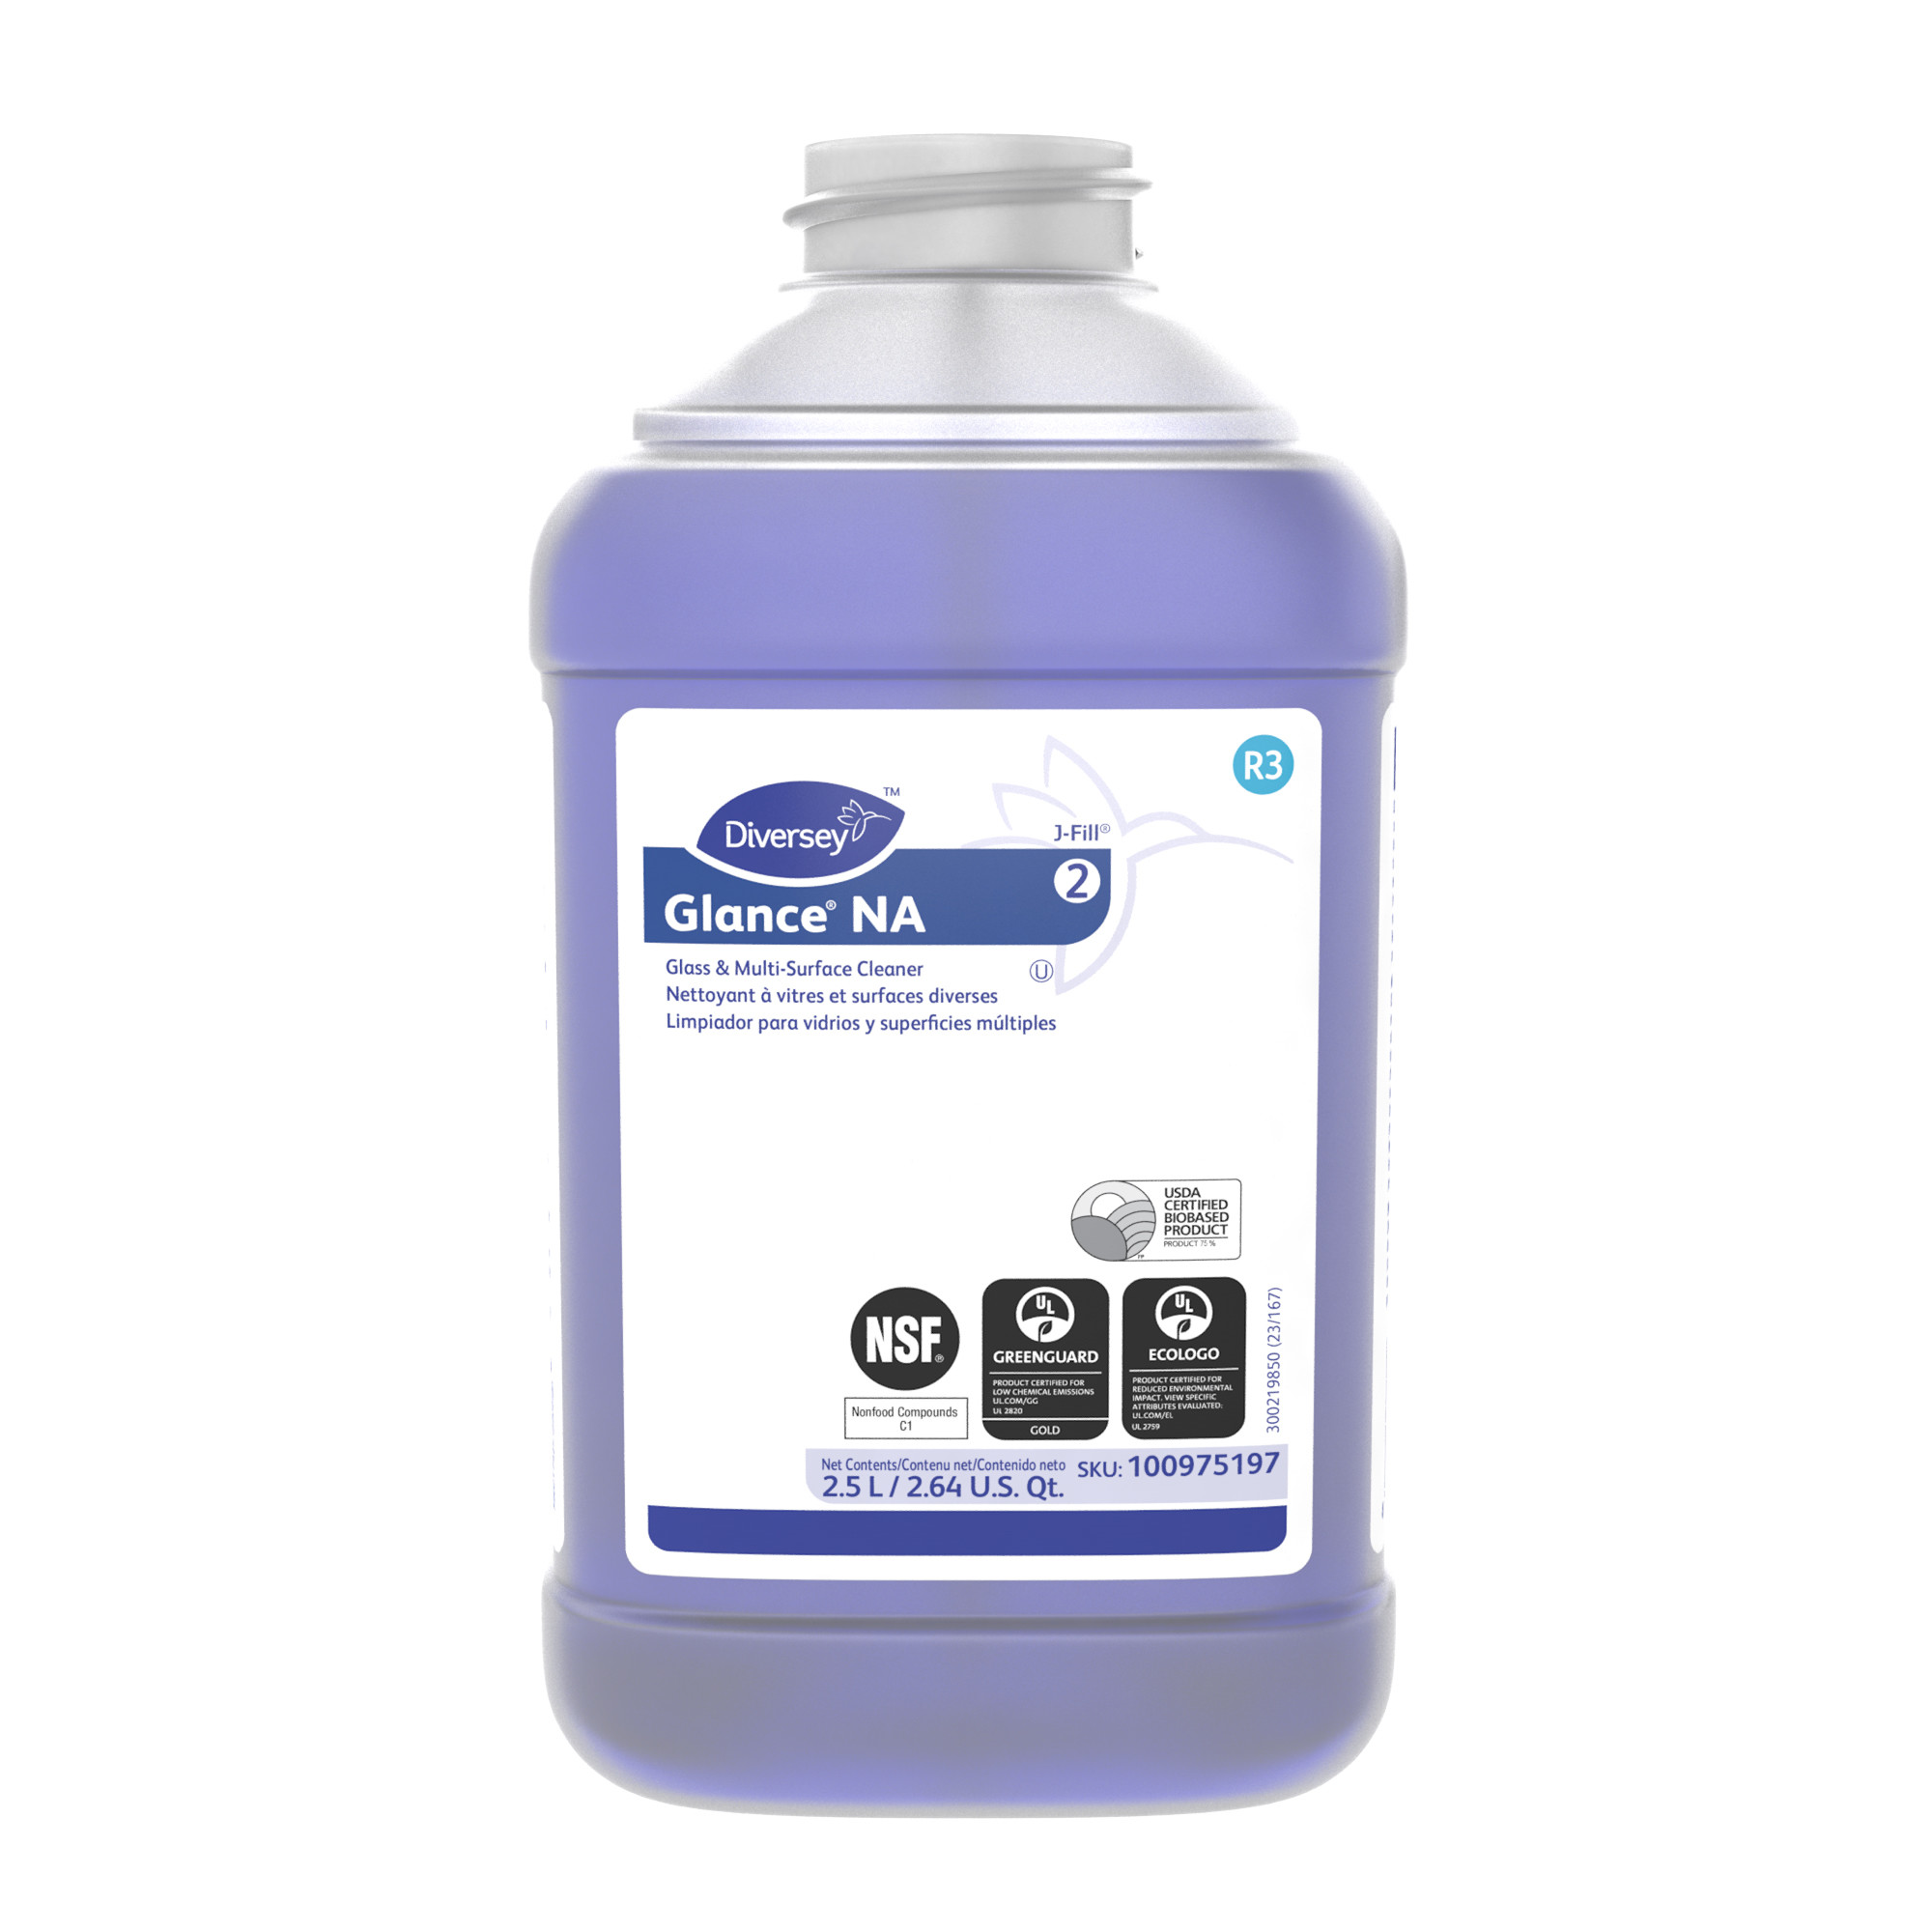 GLASS, MULTI-SURFACE CLEANER